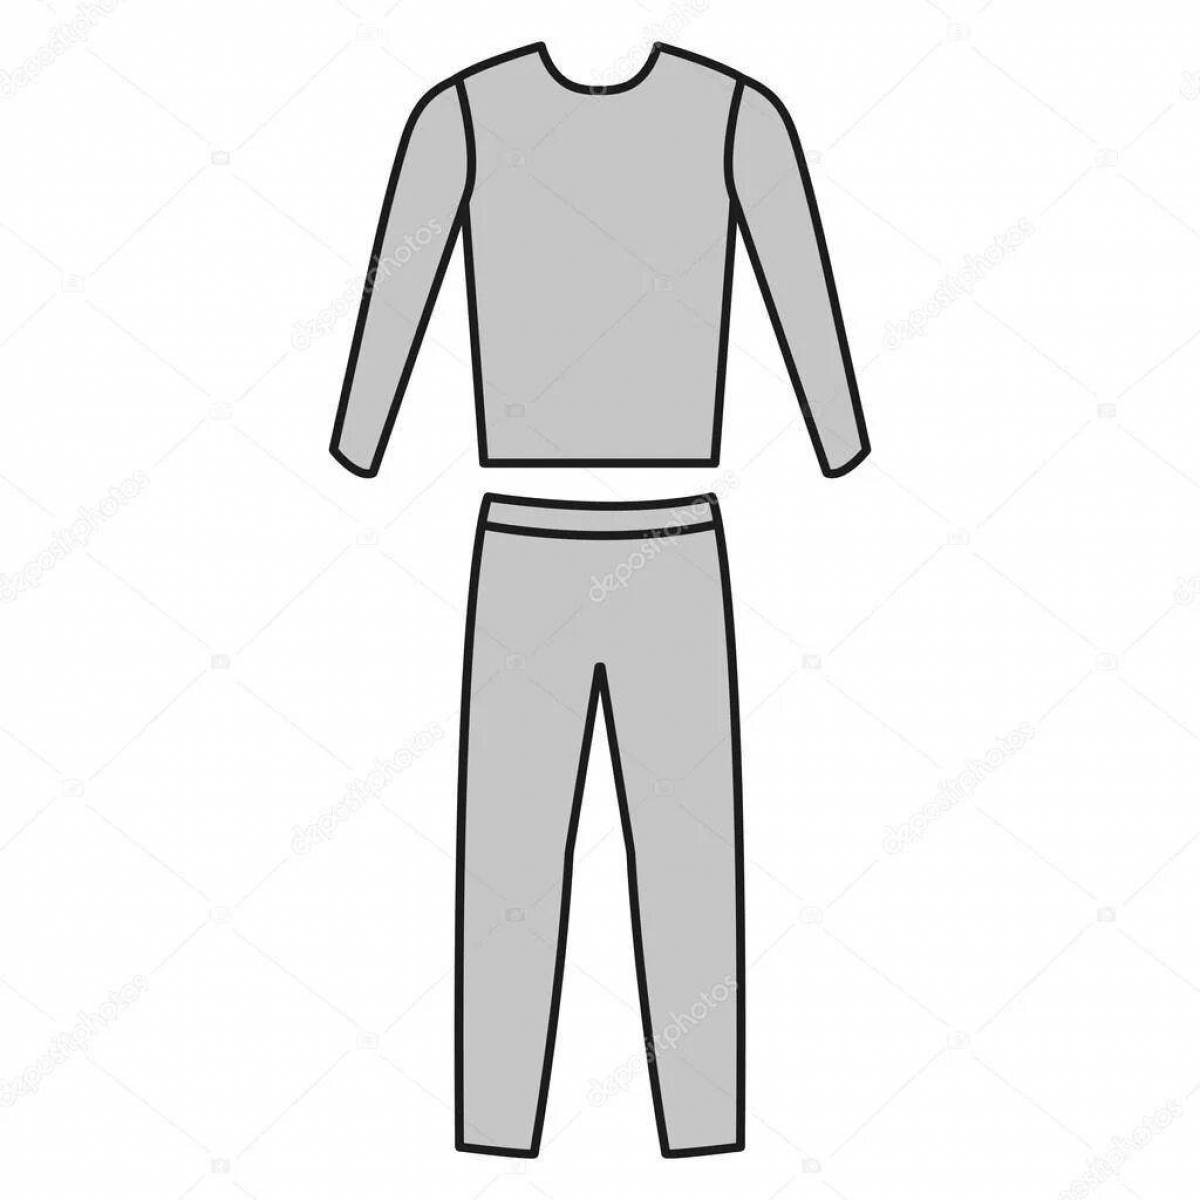 Coloring page for fun tracksuit